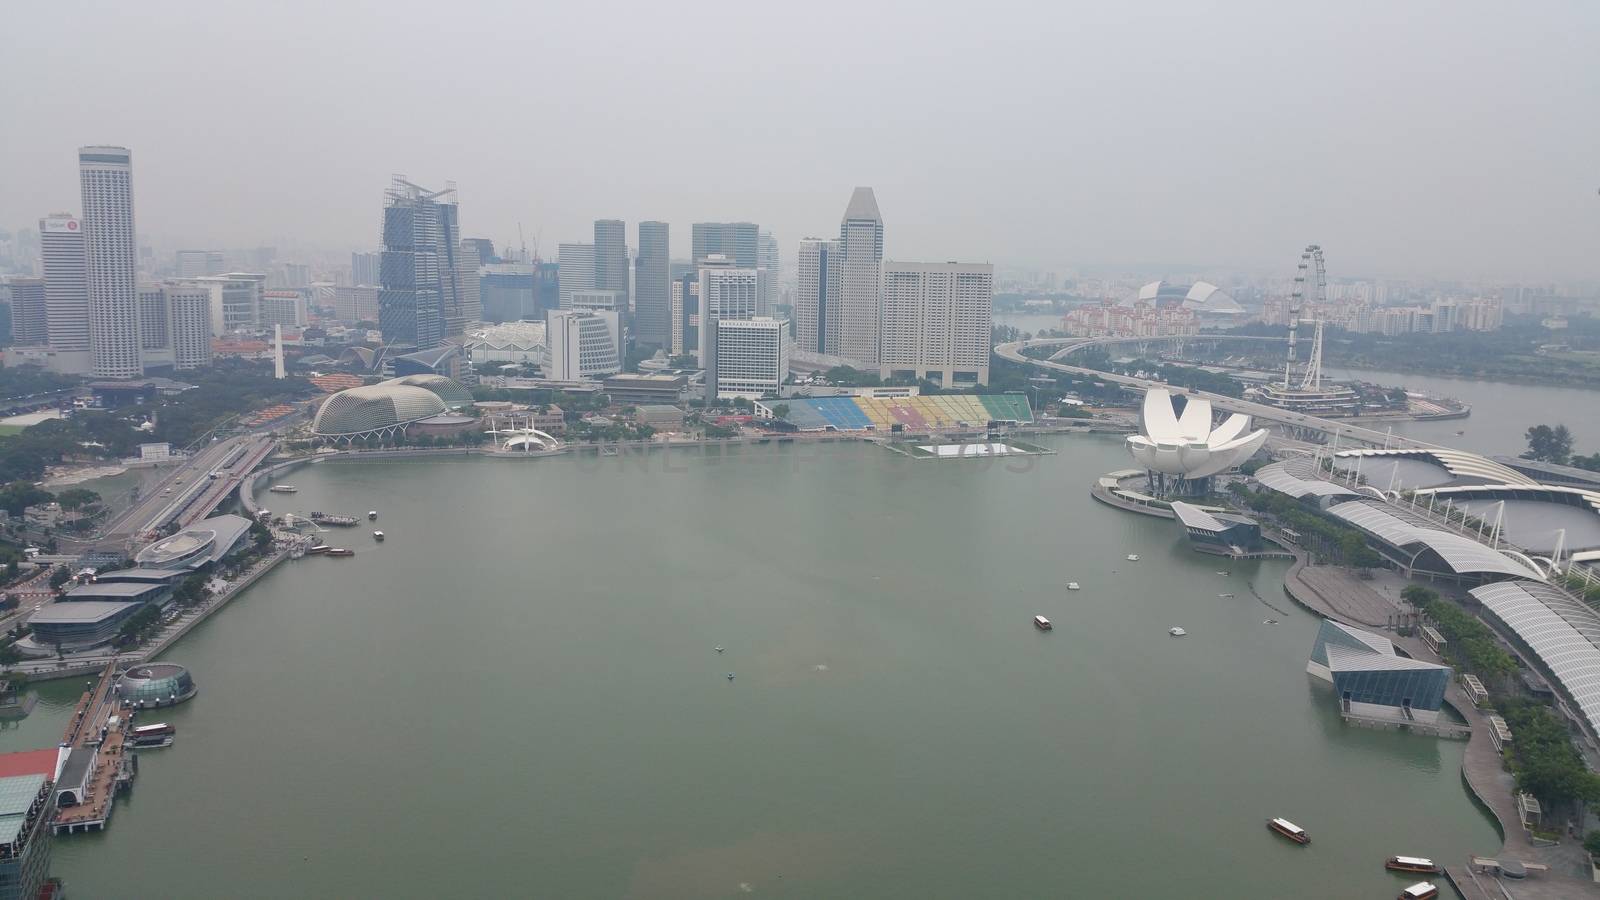 SINGAPORE: The terrible air pollution in Singapore known as the haze - caused by Indonesian forest fires and land clearances - continues on September 17, 2015, enveloping the CBD and Marina Bay. 